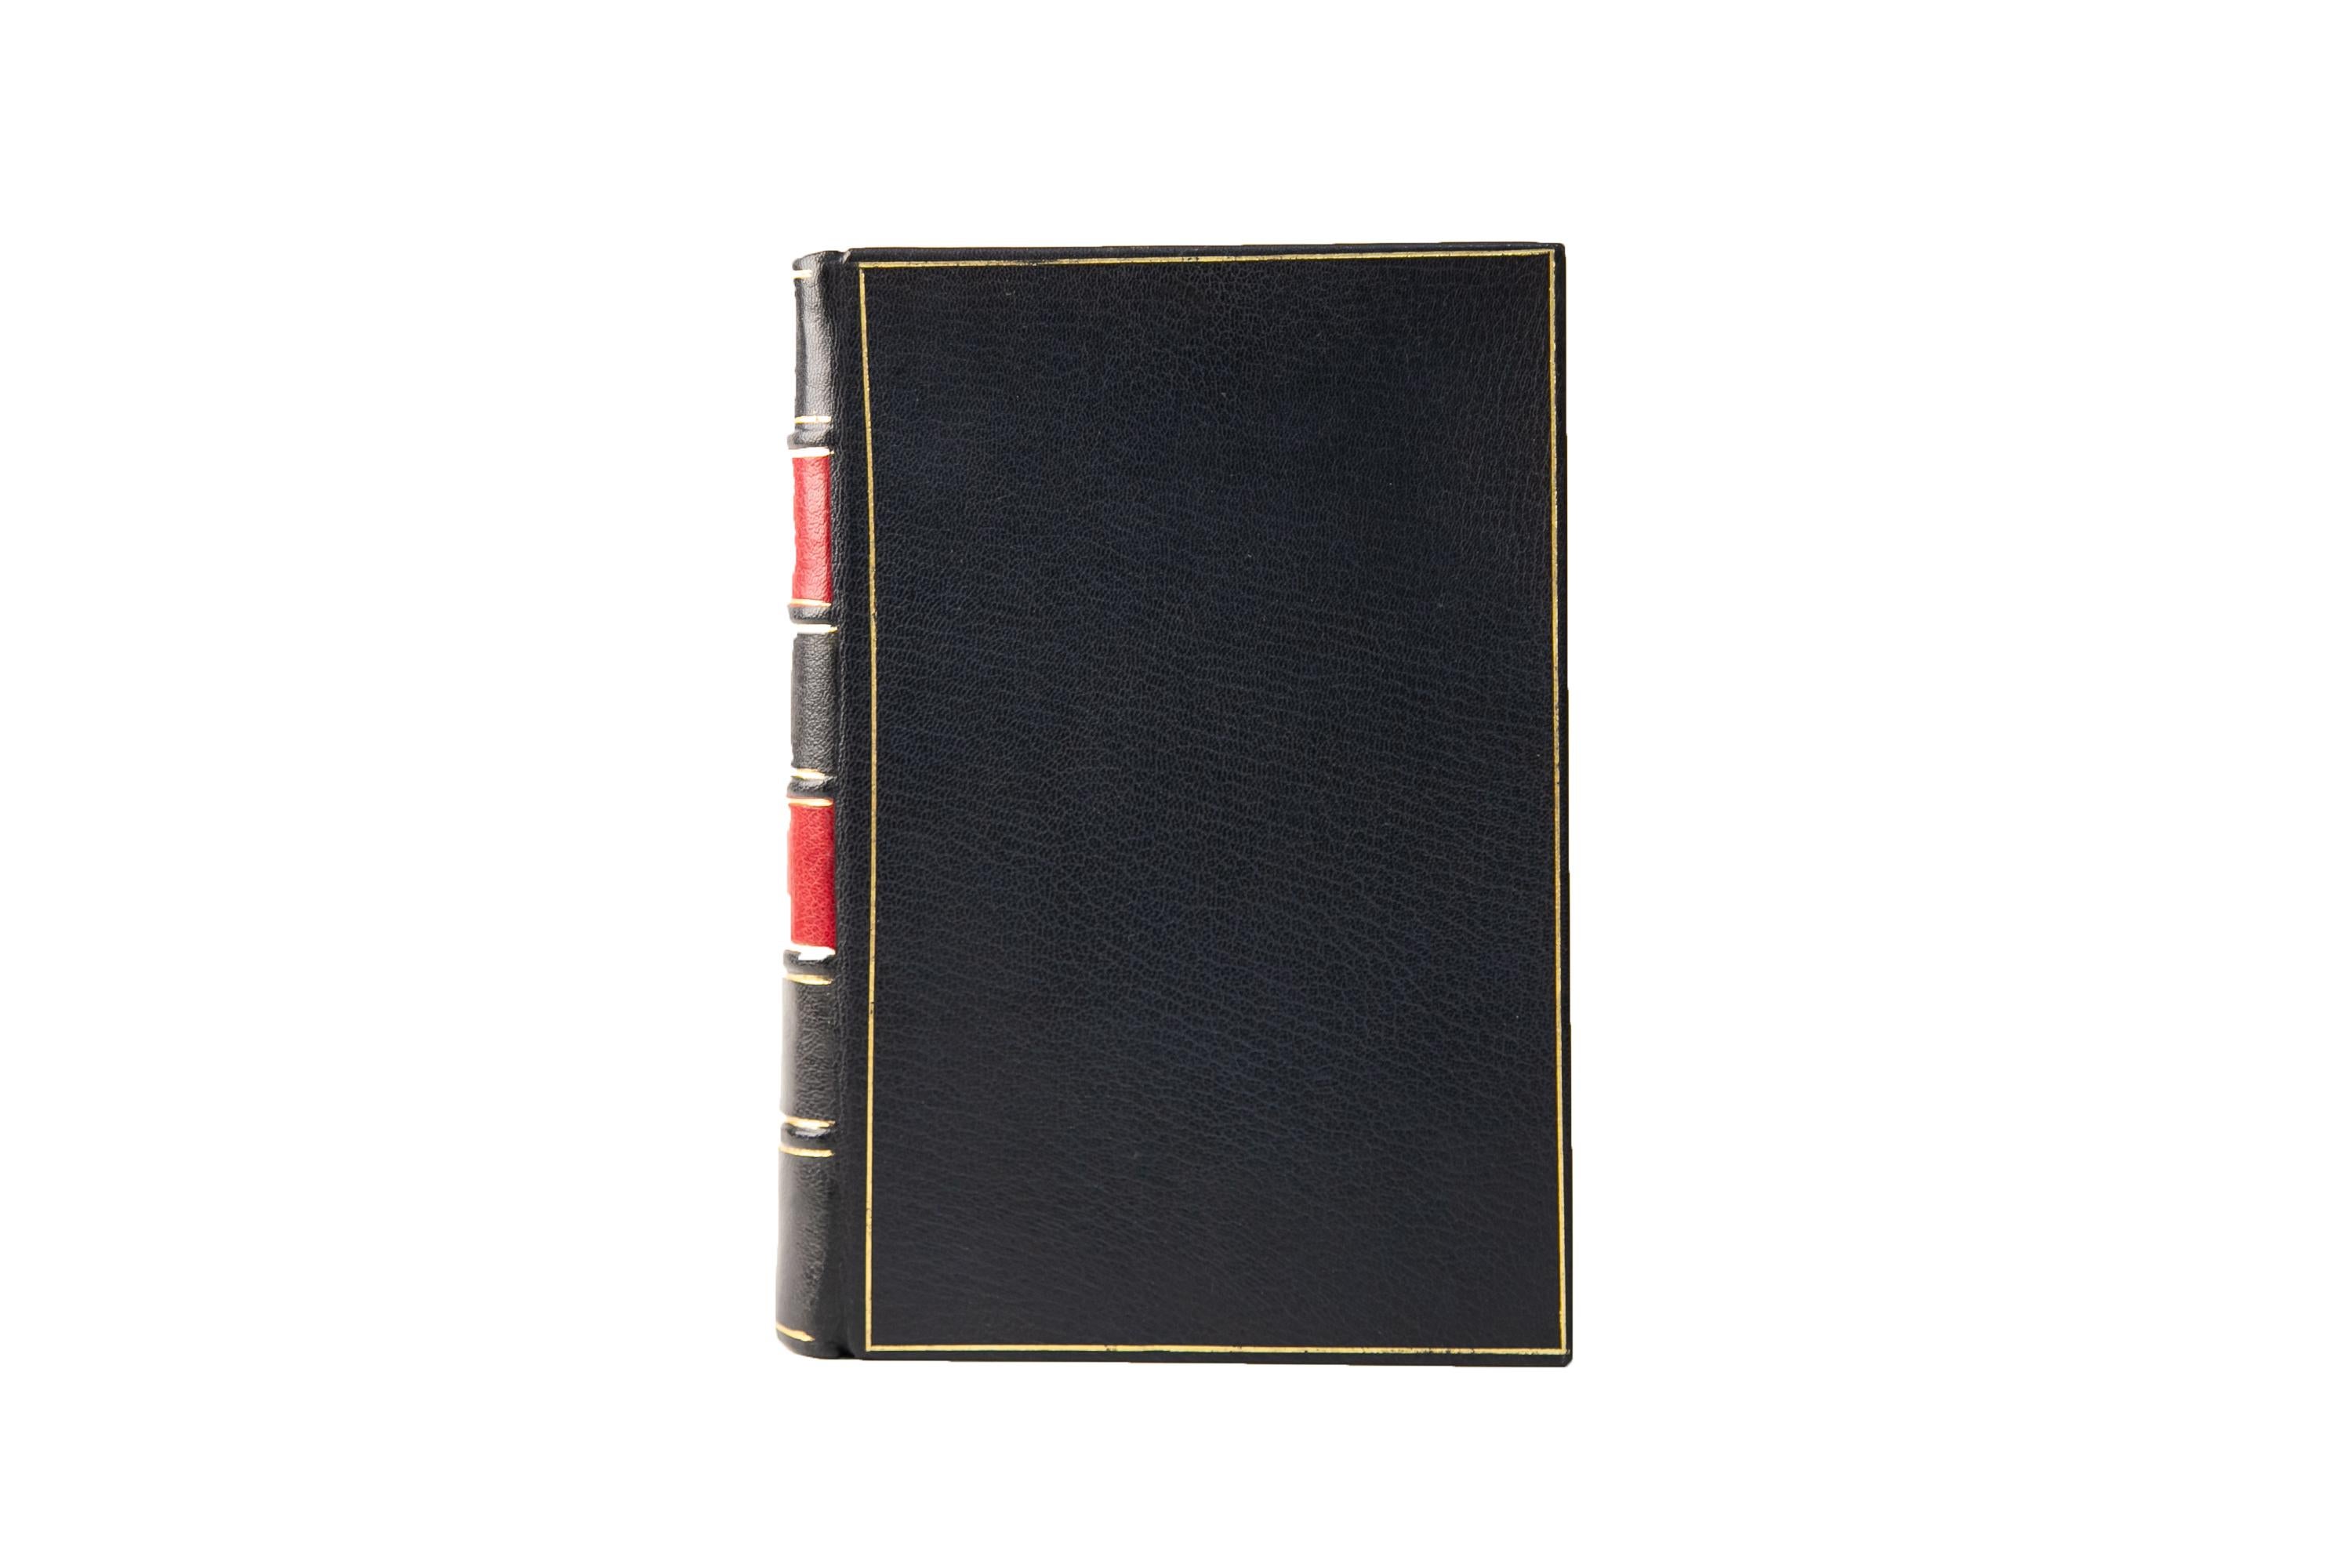 2 Volumes. Sir Winston S. Churchill, The River War. First Edition. Bound in full navy morocco with the covers displaying a gilt-tooled border. Raised bands with panels displaying bordering, lion details, and label lettering, all gilt-tooled, and the